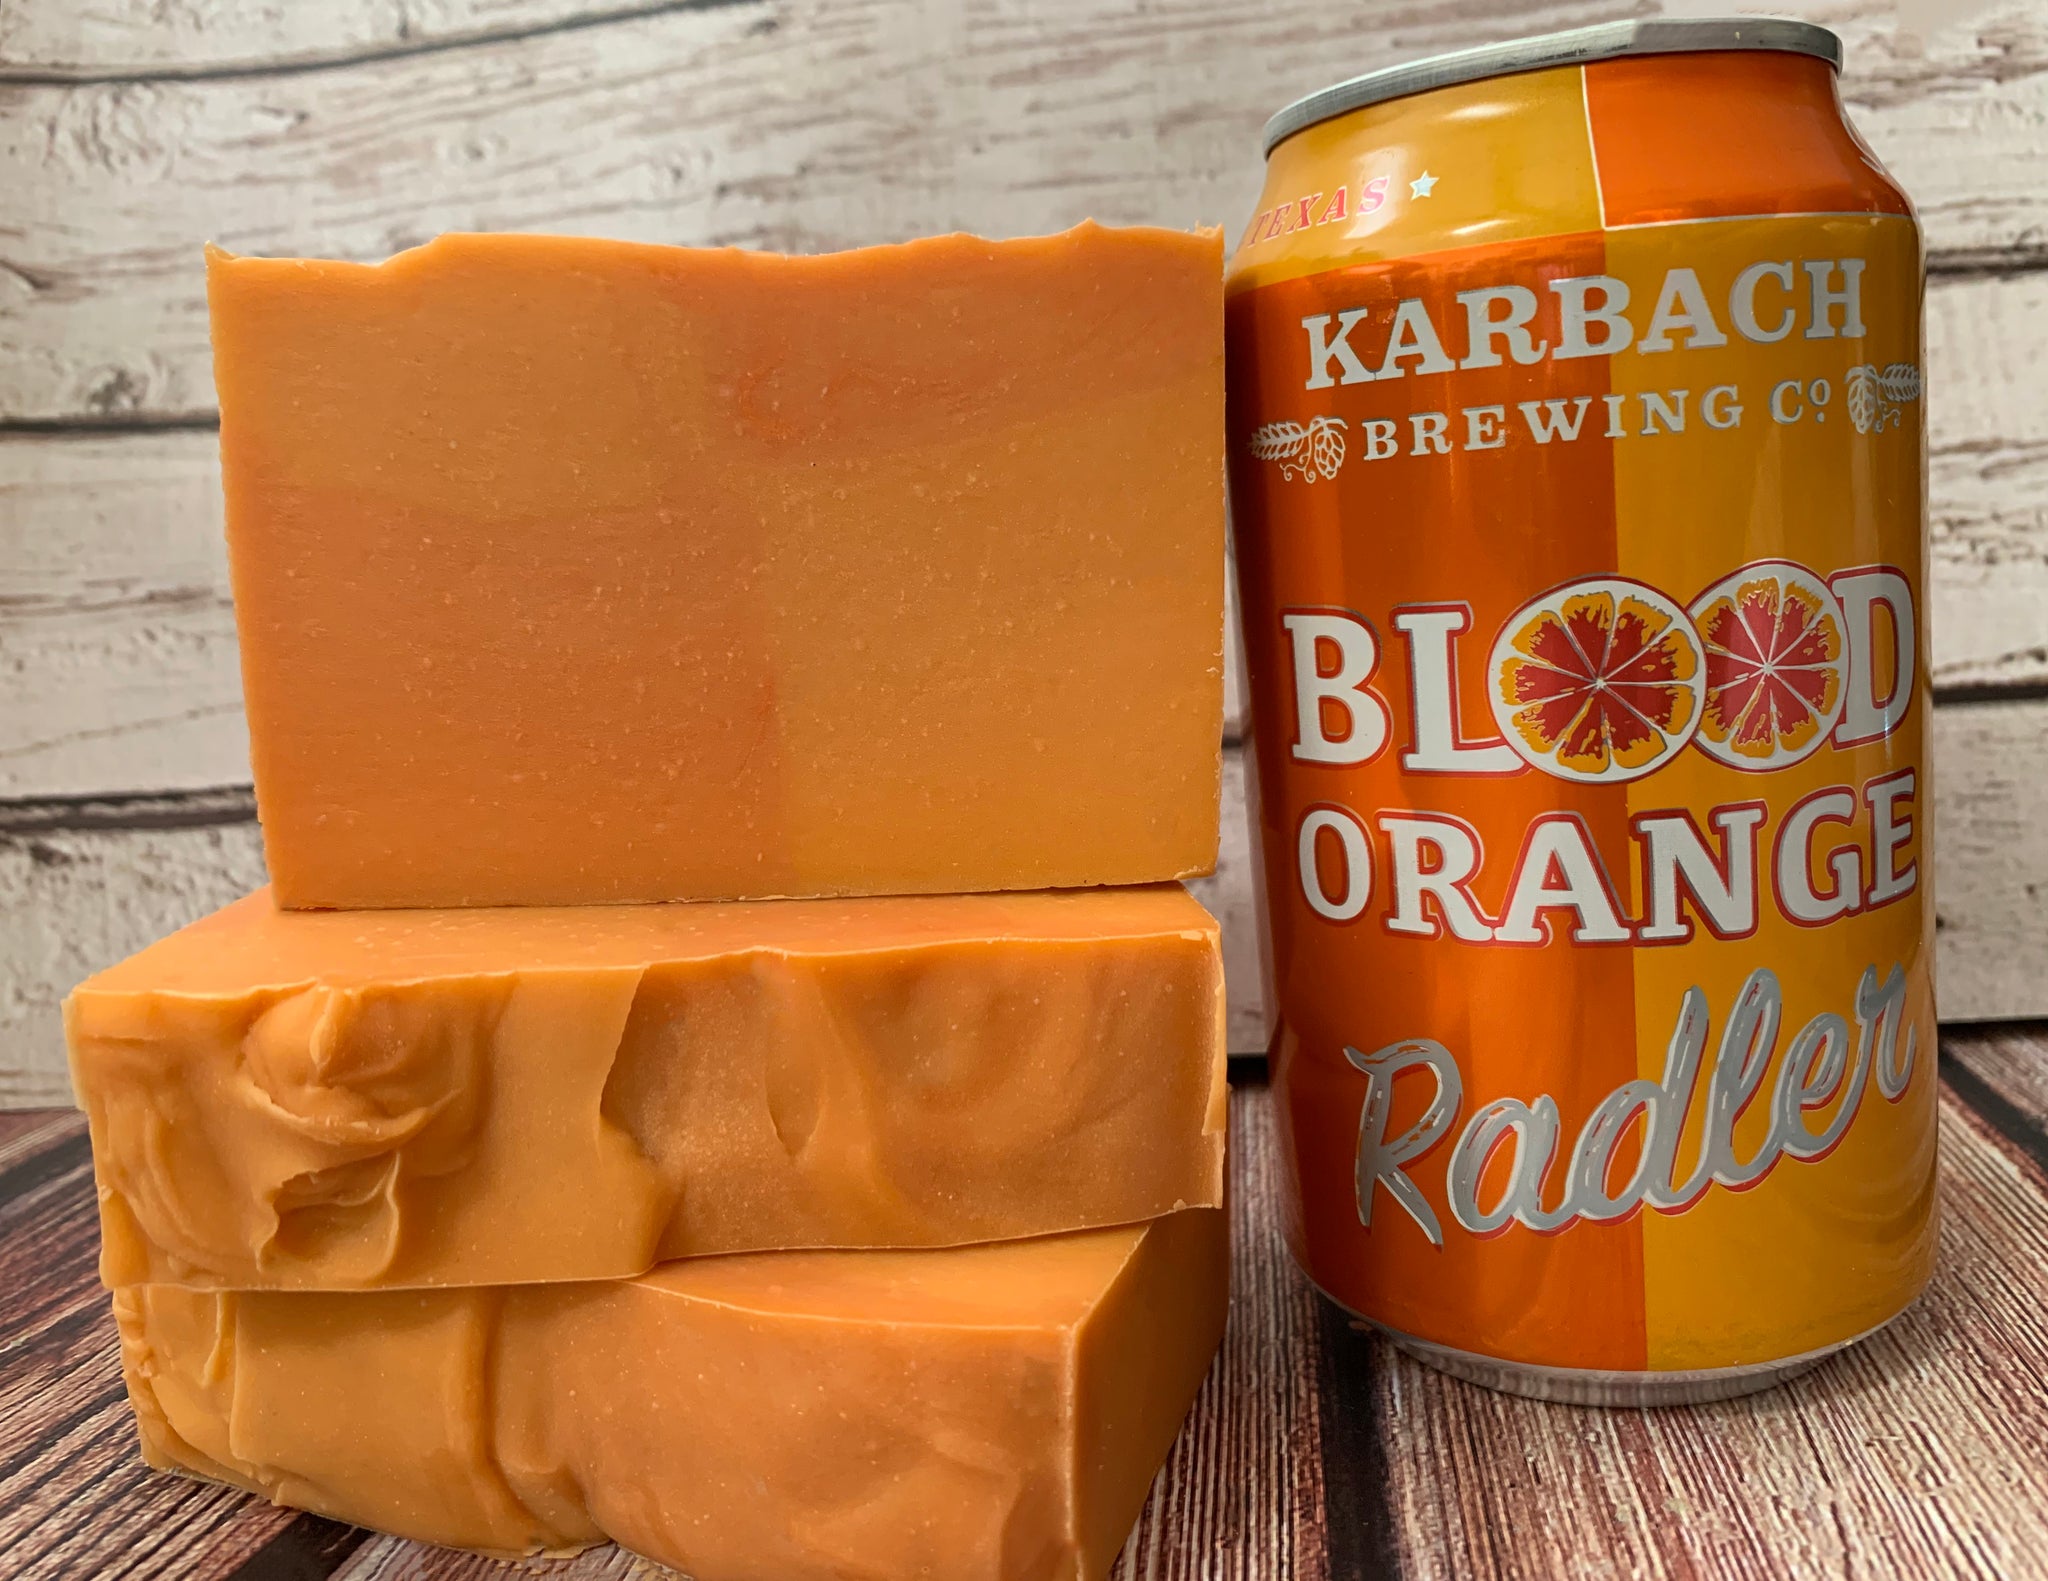 blood orange radler beer soap handmade in texas with beer from karbach brewing company houston texas brewery spunkndisorderly craft beer soap blood orange artisan soap 